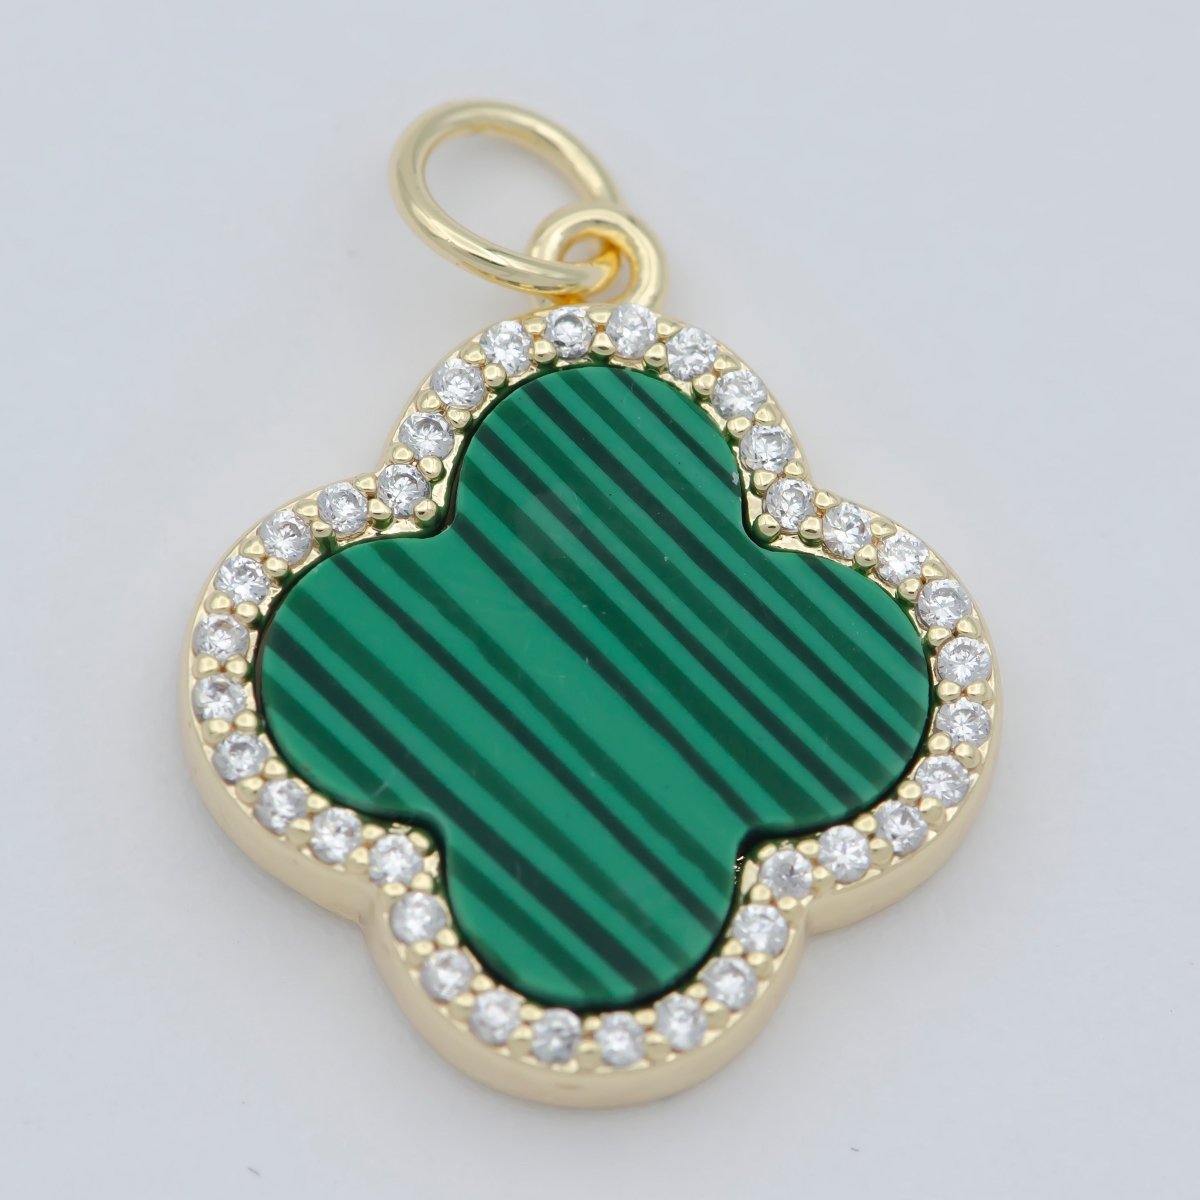 Natural Gemstone charm Malachite Clover pendant, Gold Filled Charm Semi Previous Stone with Gold Filled Bezel for Earring necklace Bracelet M-369 - DLUXCA